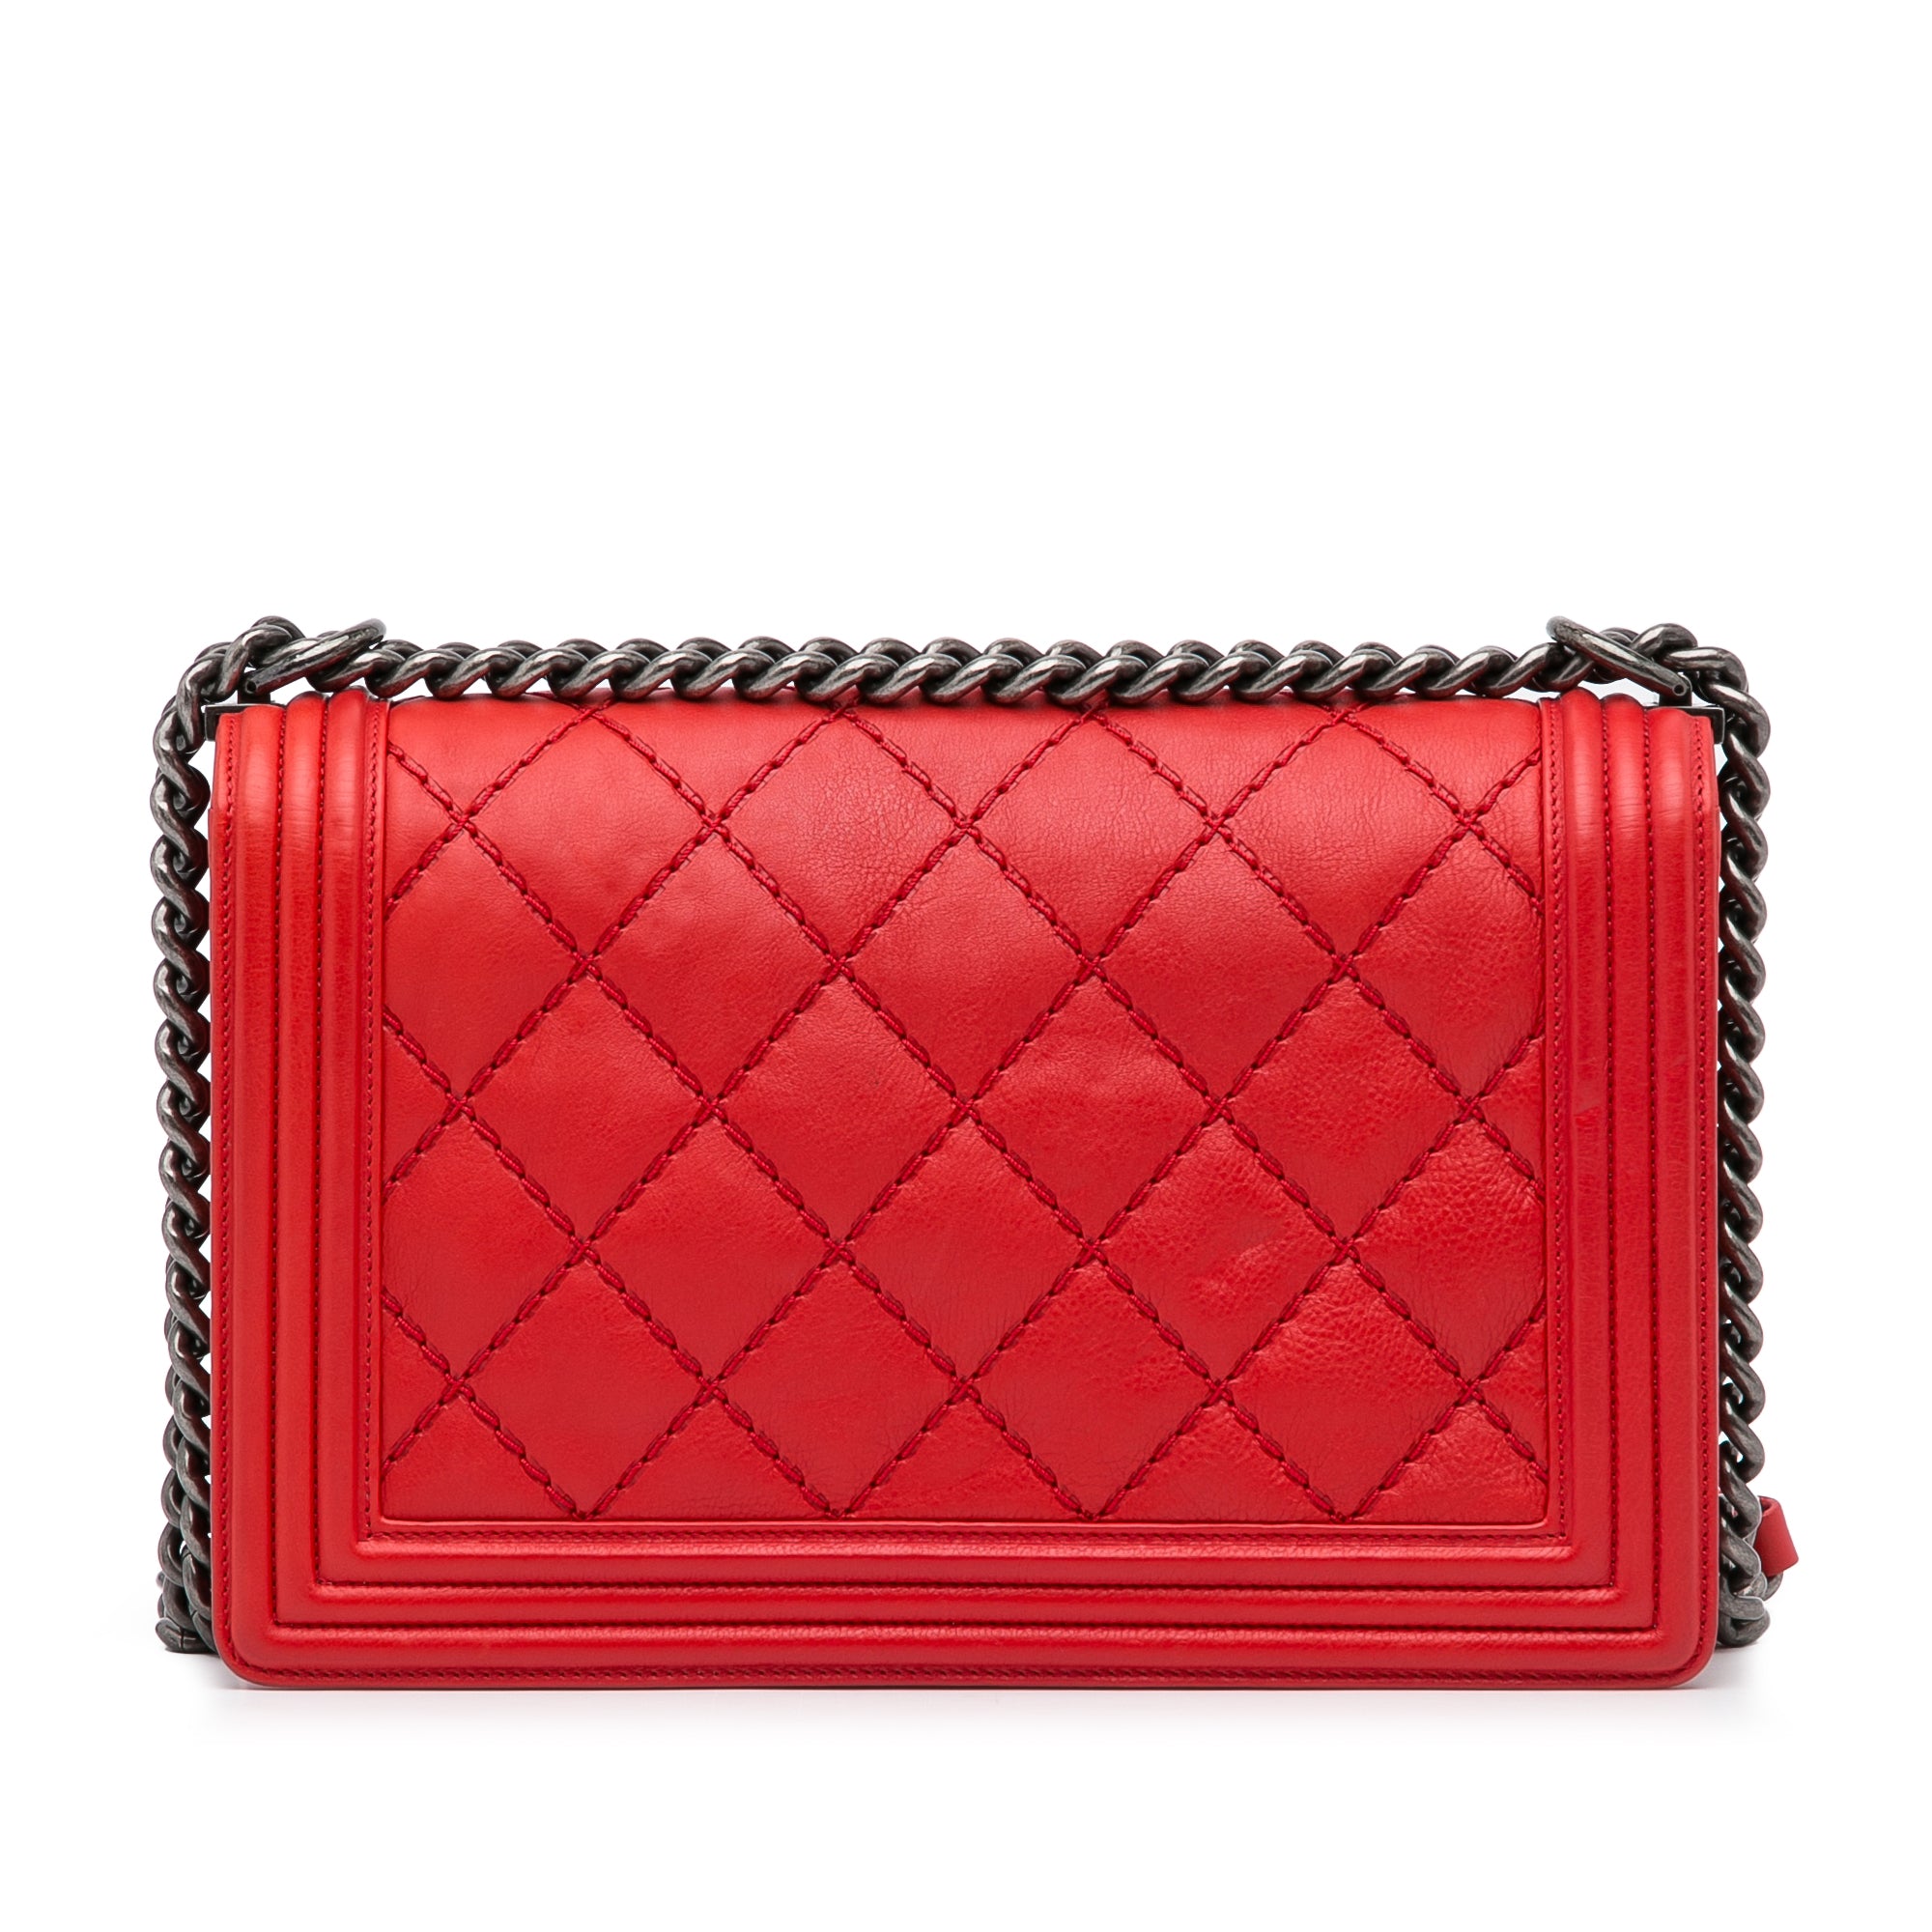 Red Chanel Small Lambskin Double Stitch Boy Flap Shoulder Bag, Cra-wallonieShops Revival